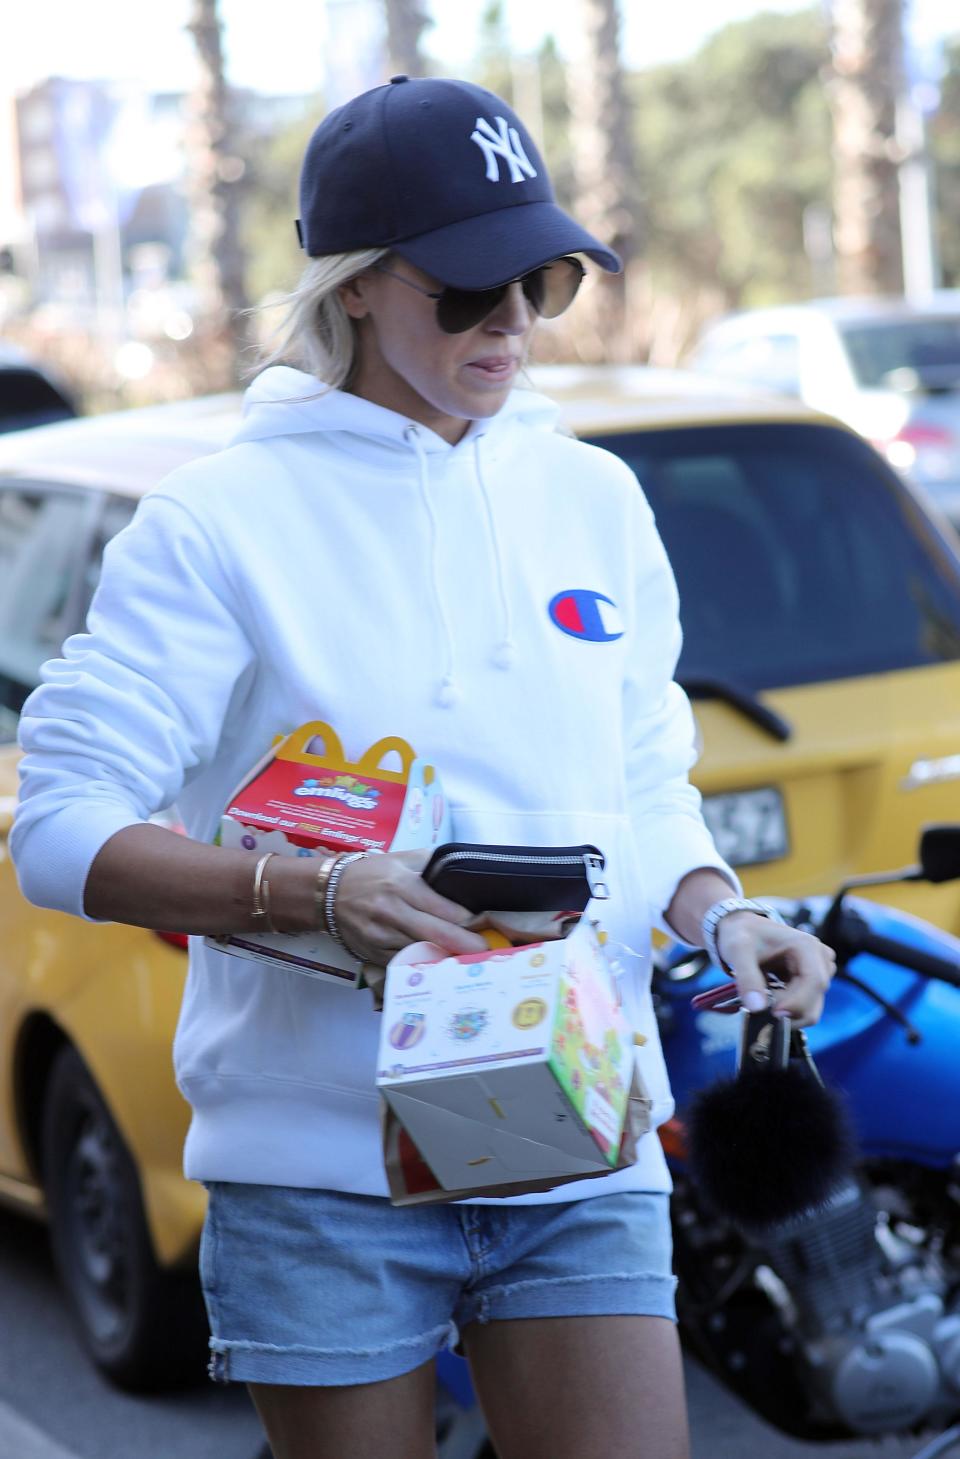 Roxy's Maccas run after Oliver's jail release